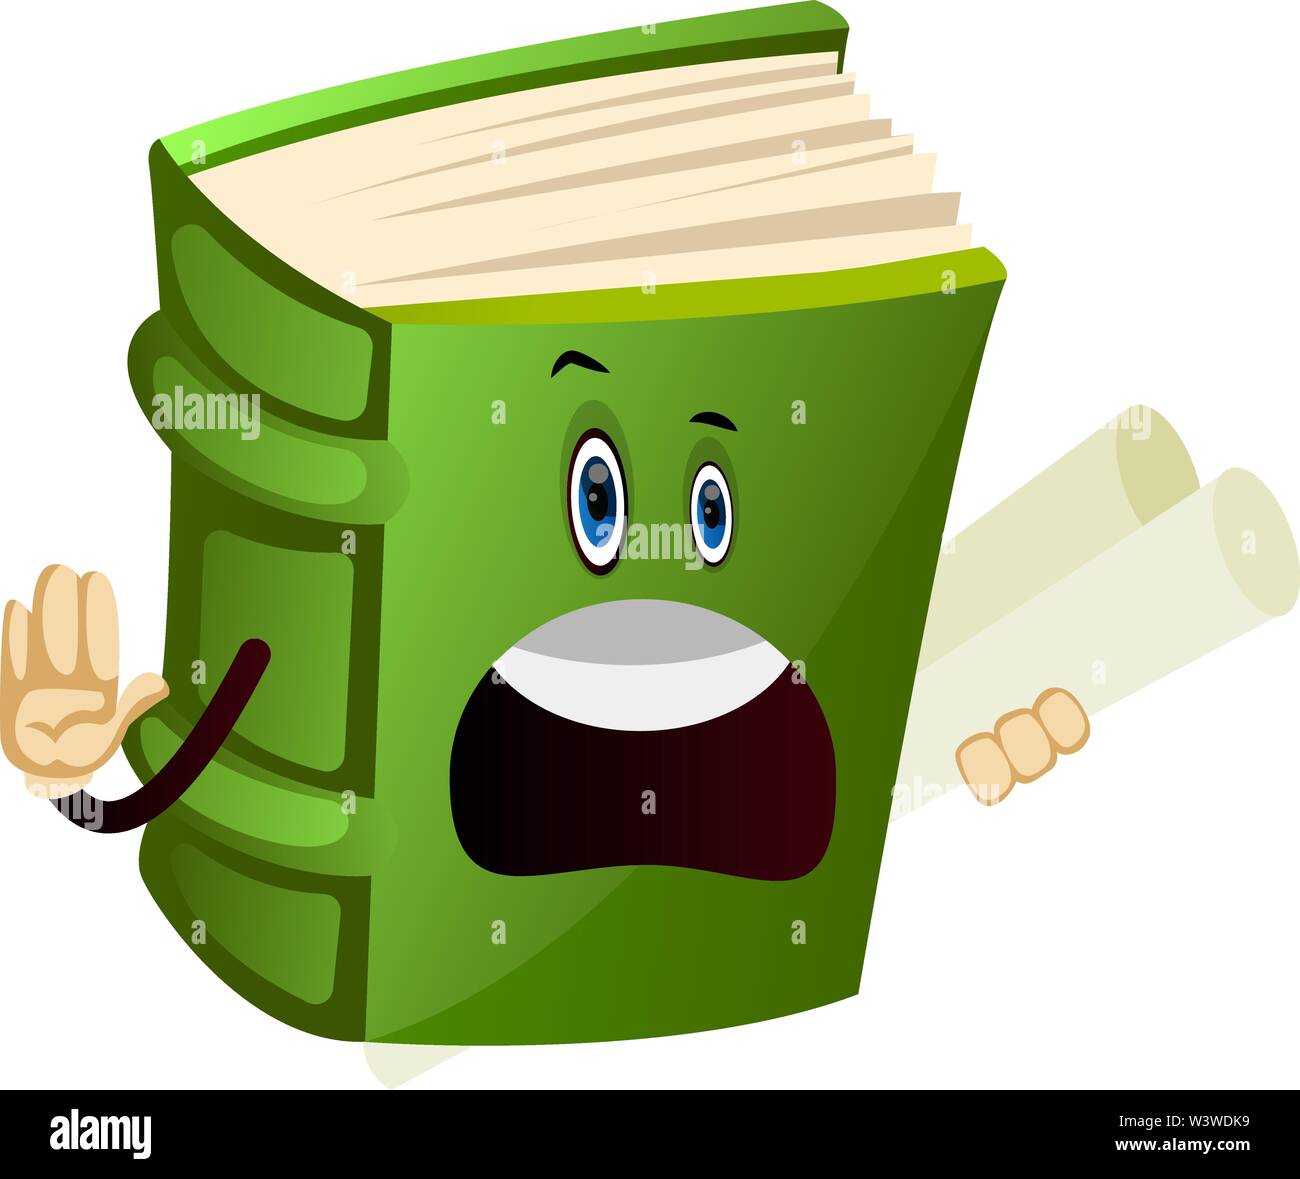 Cartoon book character is giving instructions, illustration, vector on white background. Stock Vector